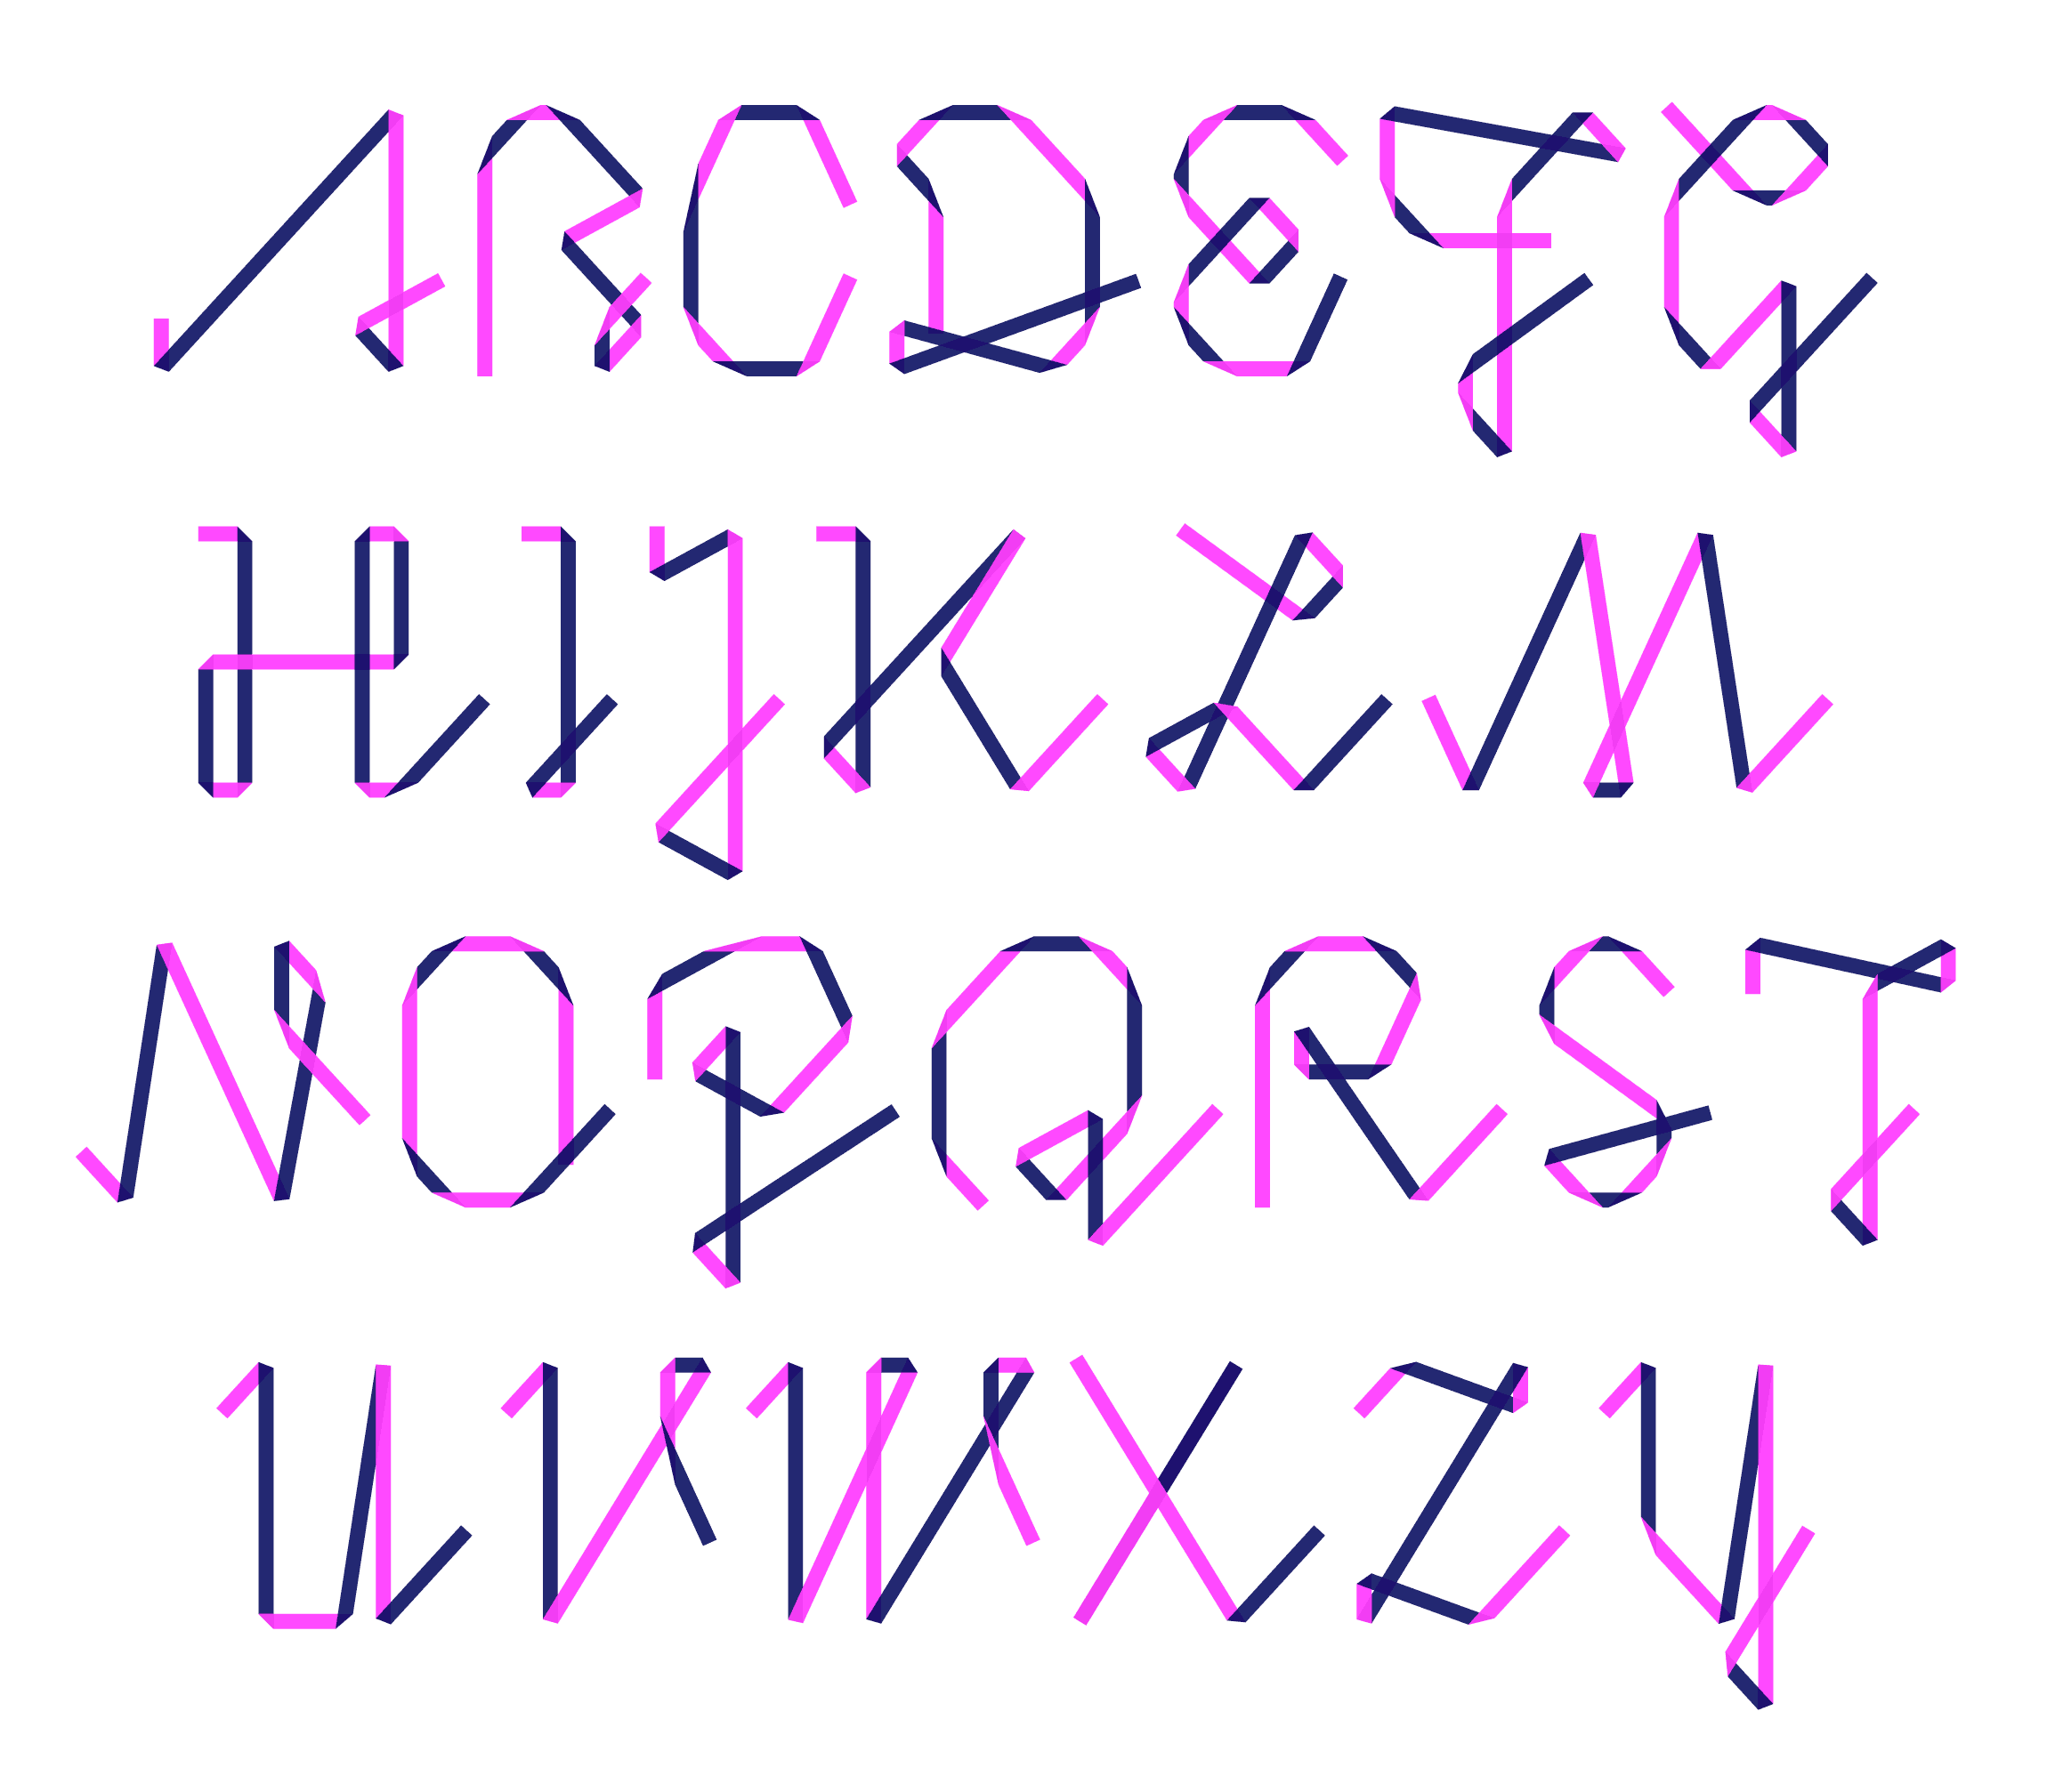 Uppercase set in one of the foldfonts.